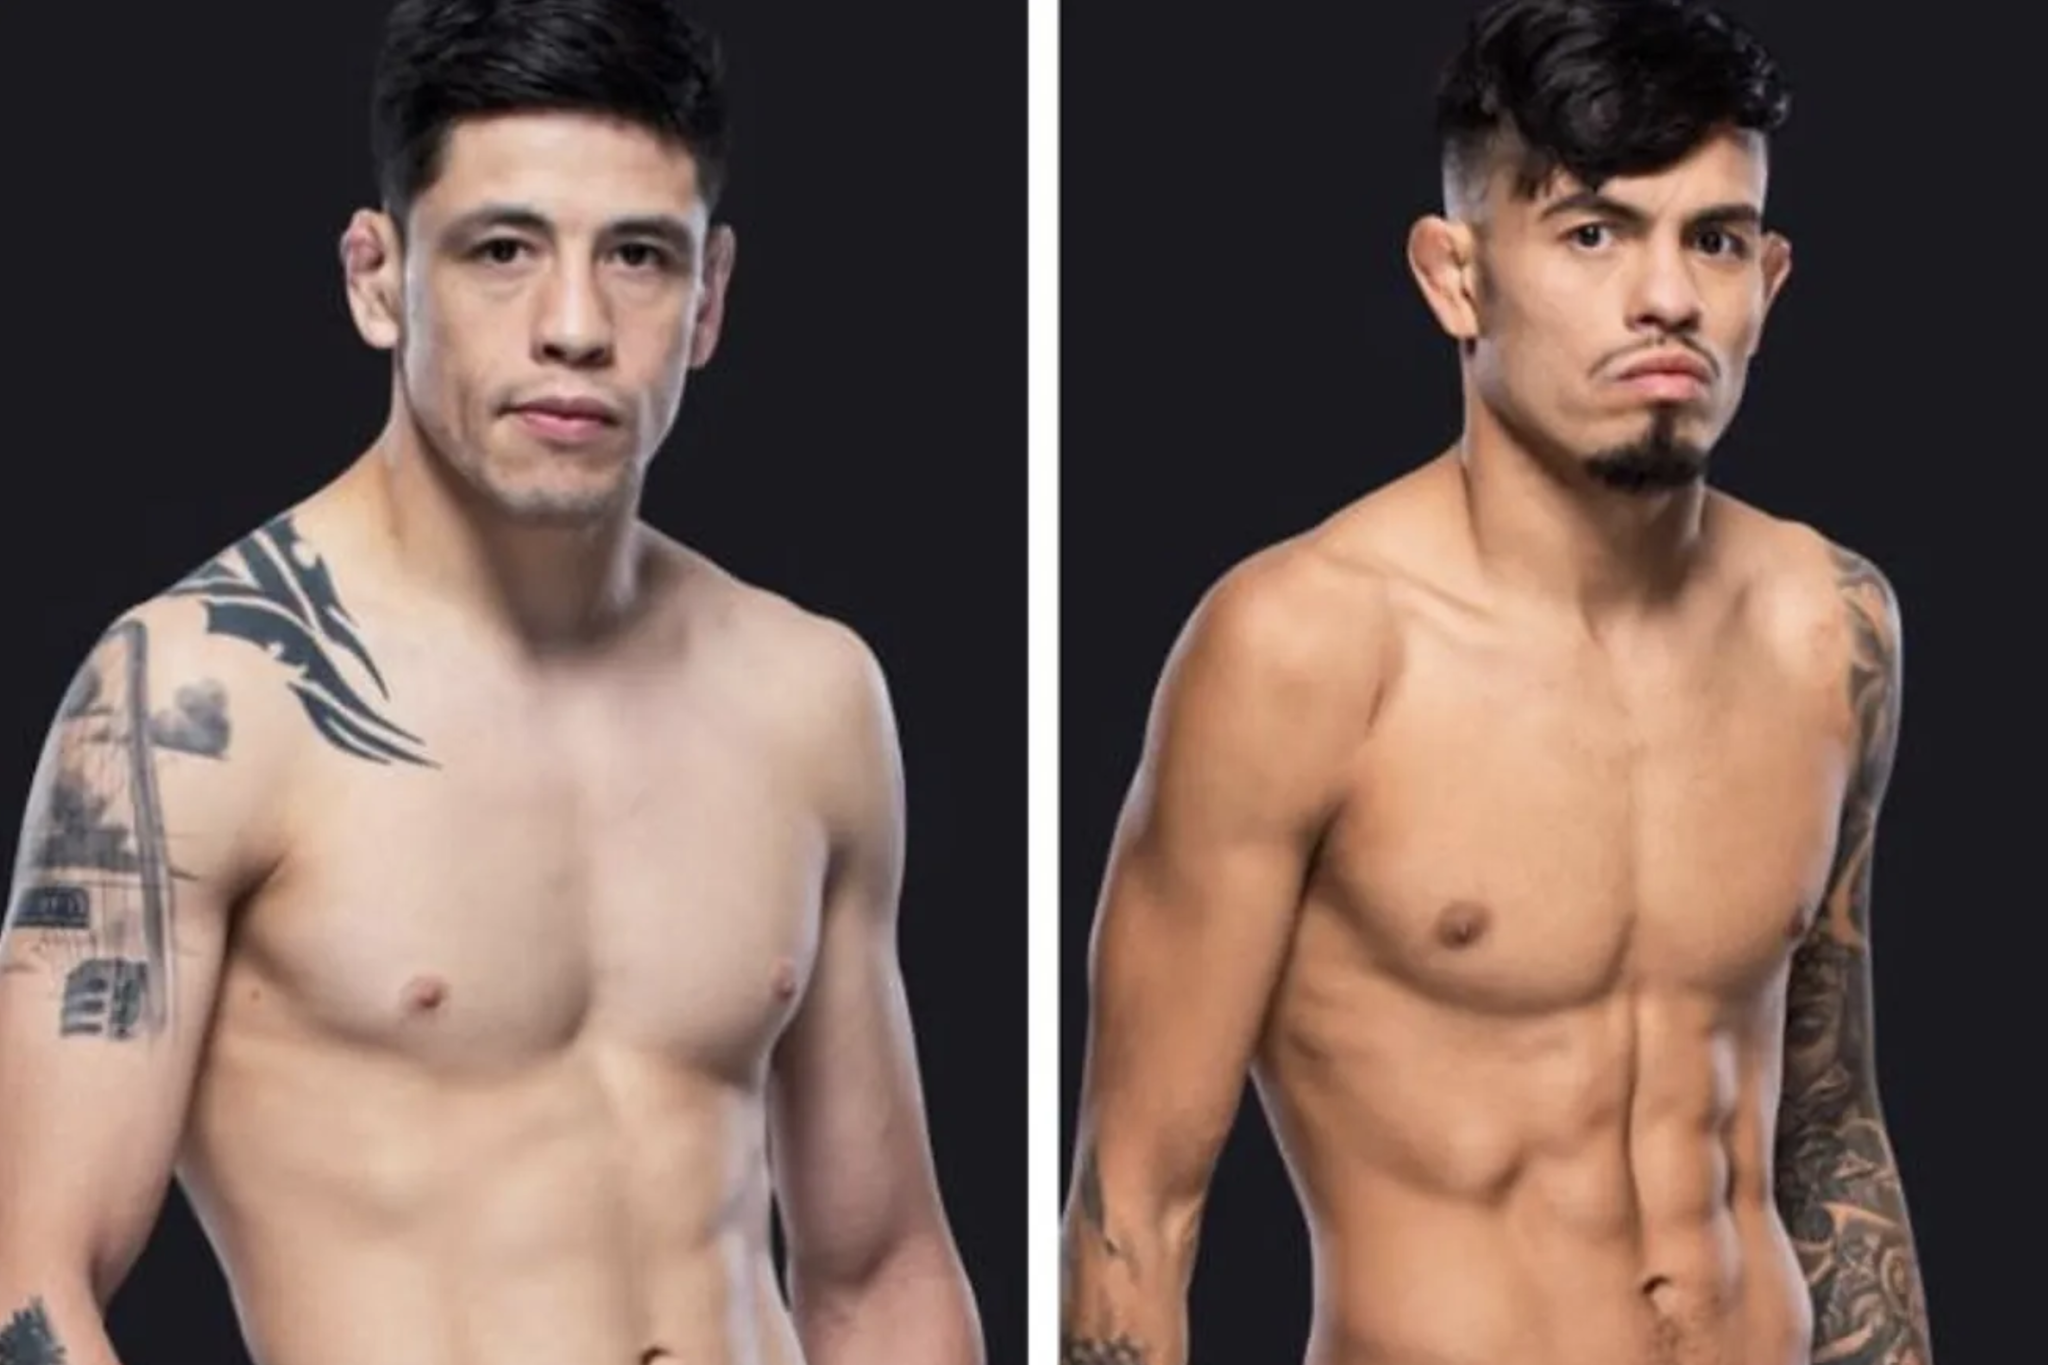 UFC Moreno vs Royval 2 Purse: How much will the fighters earn for their bout this Saturday?